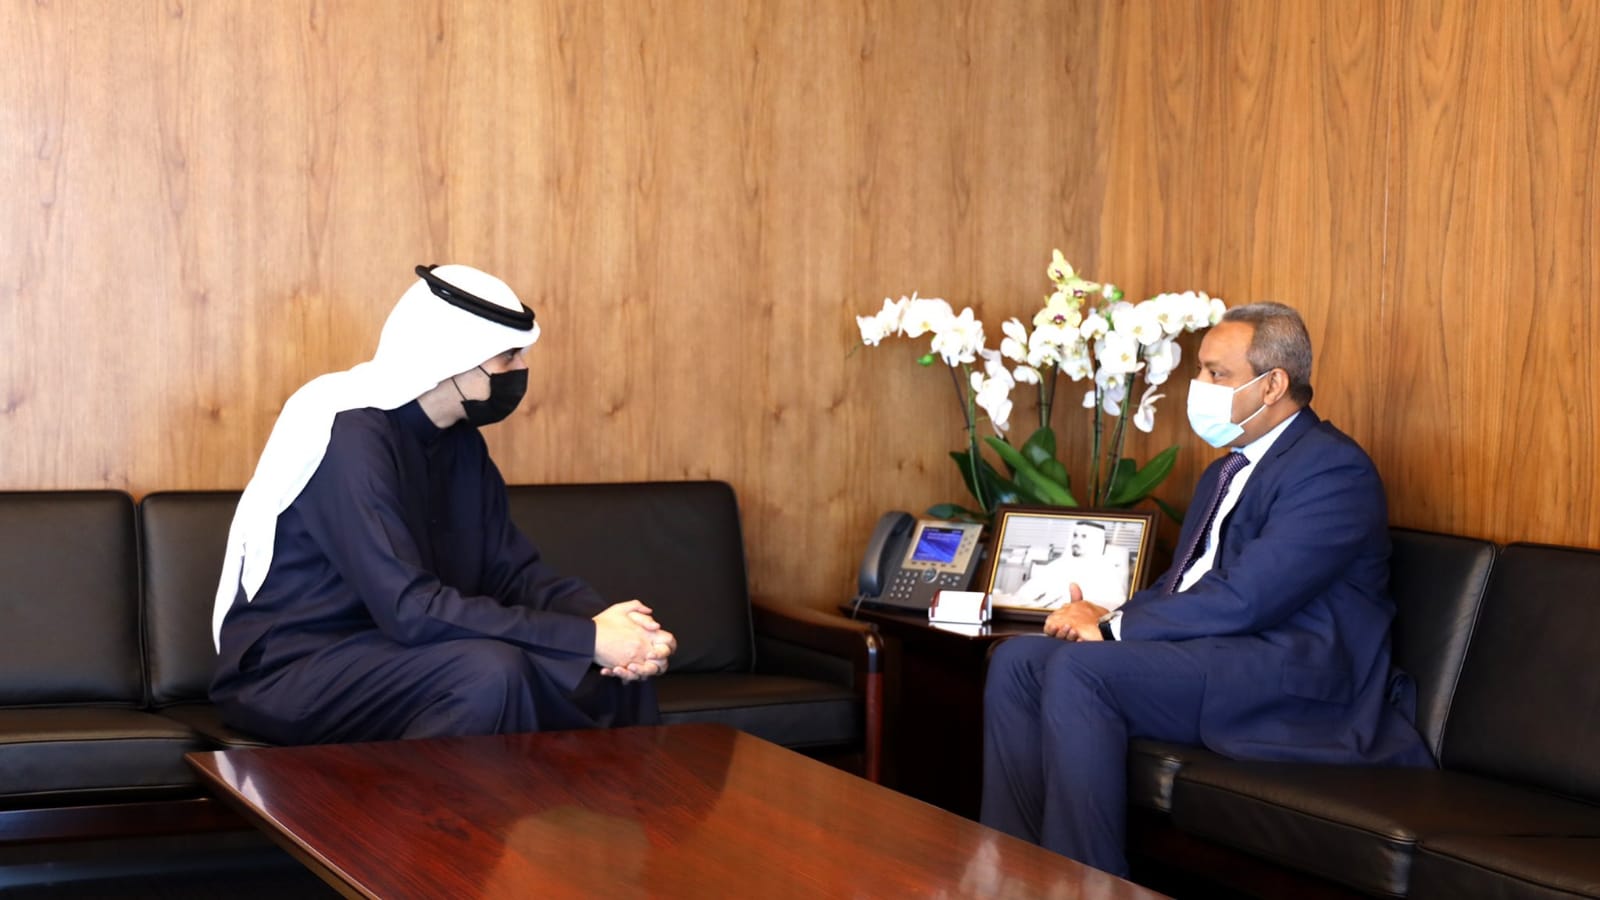 Meeting of His Excellency the Ambassador with the Director General of the Kuwait Direct Investment Promotion Authority, KDIPA. 